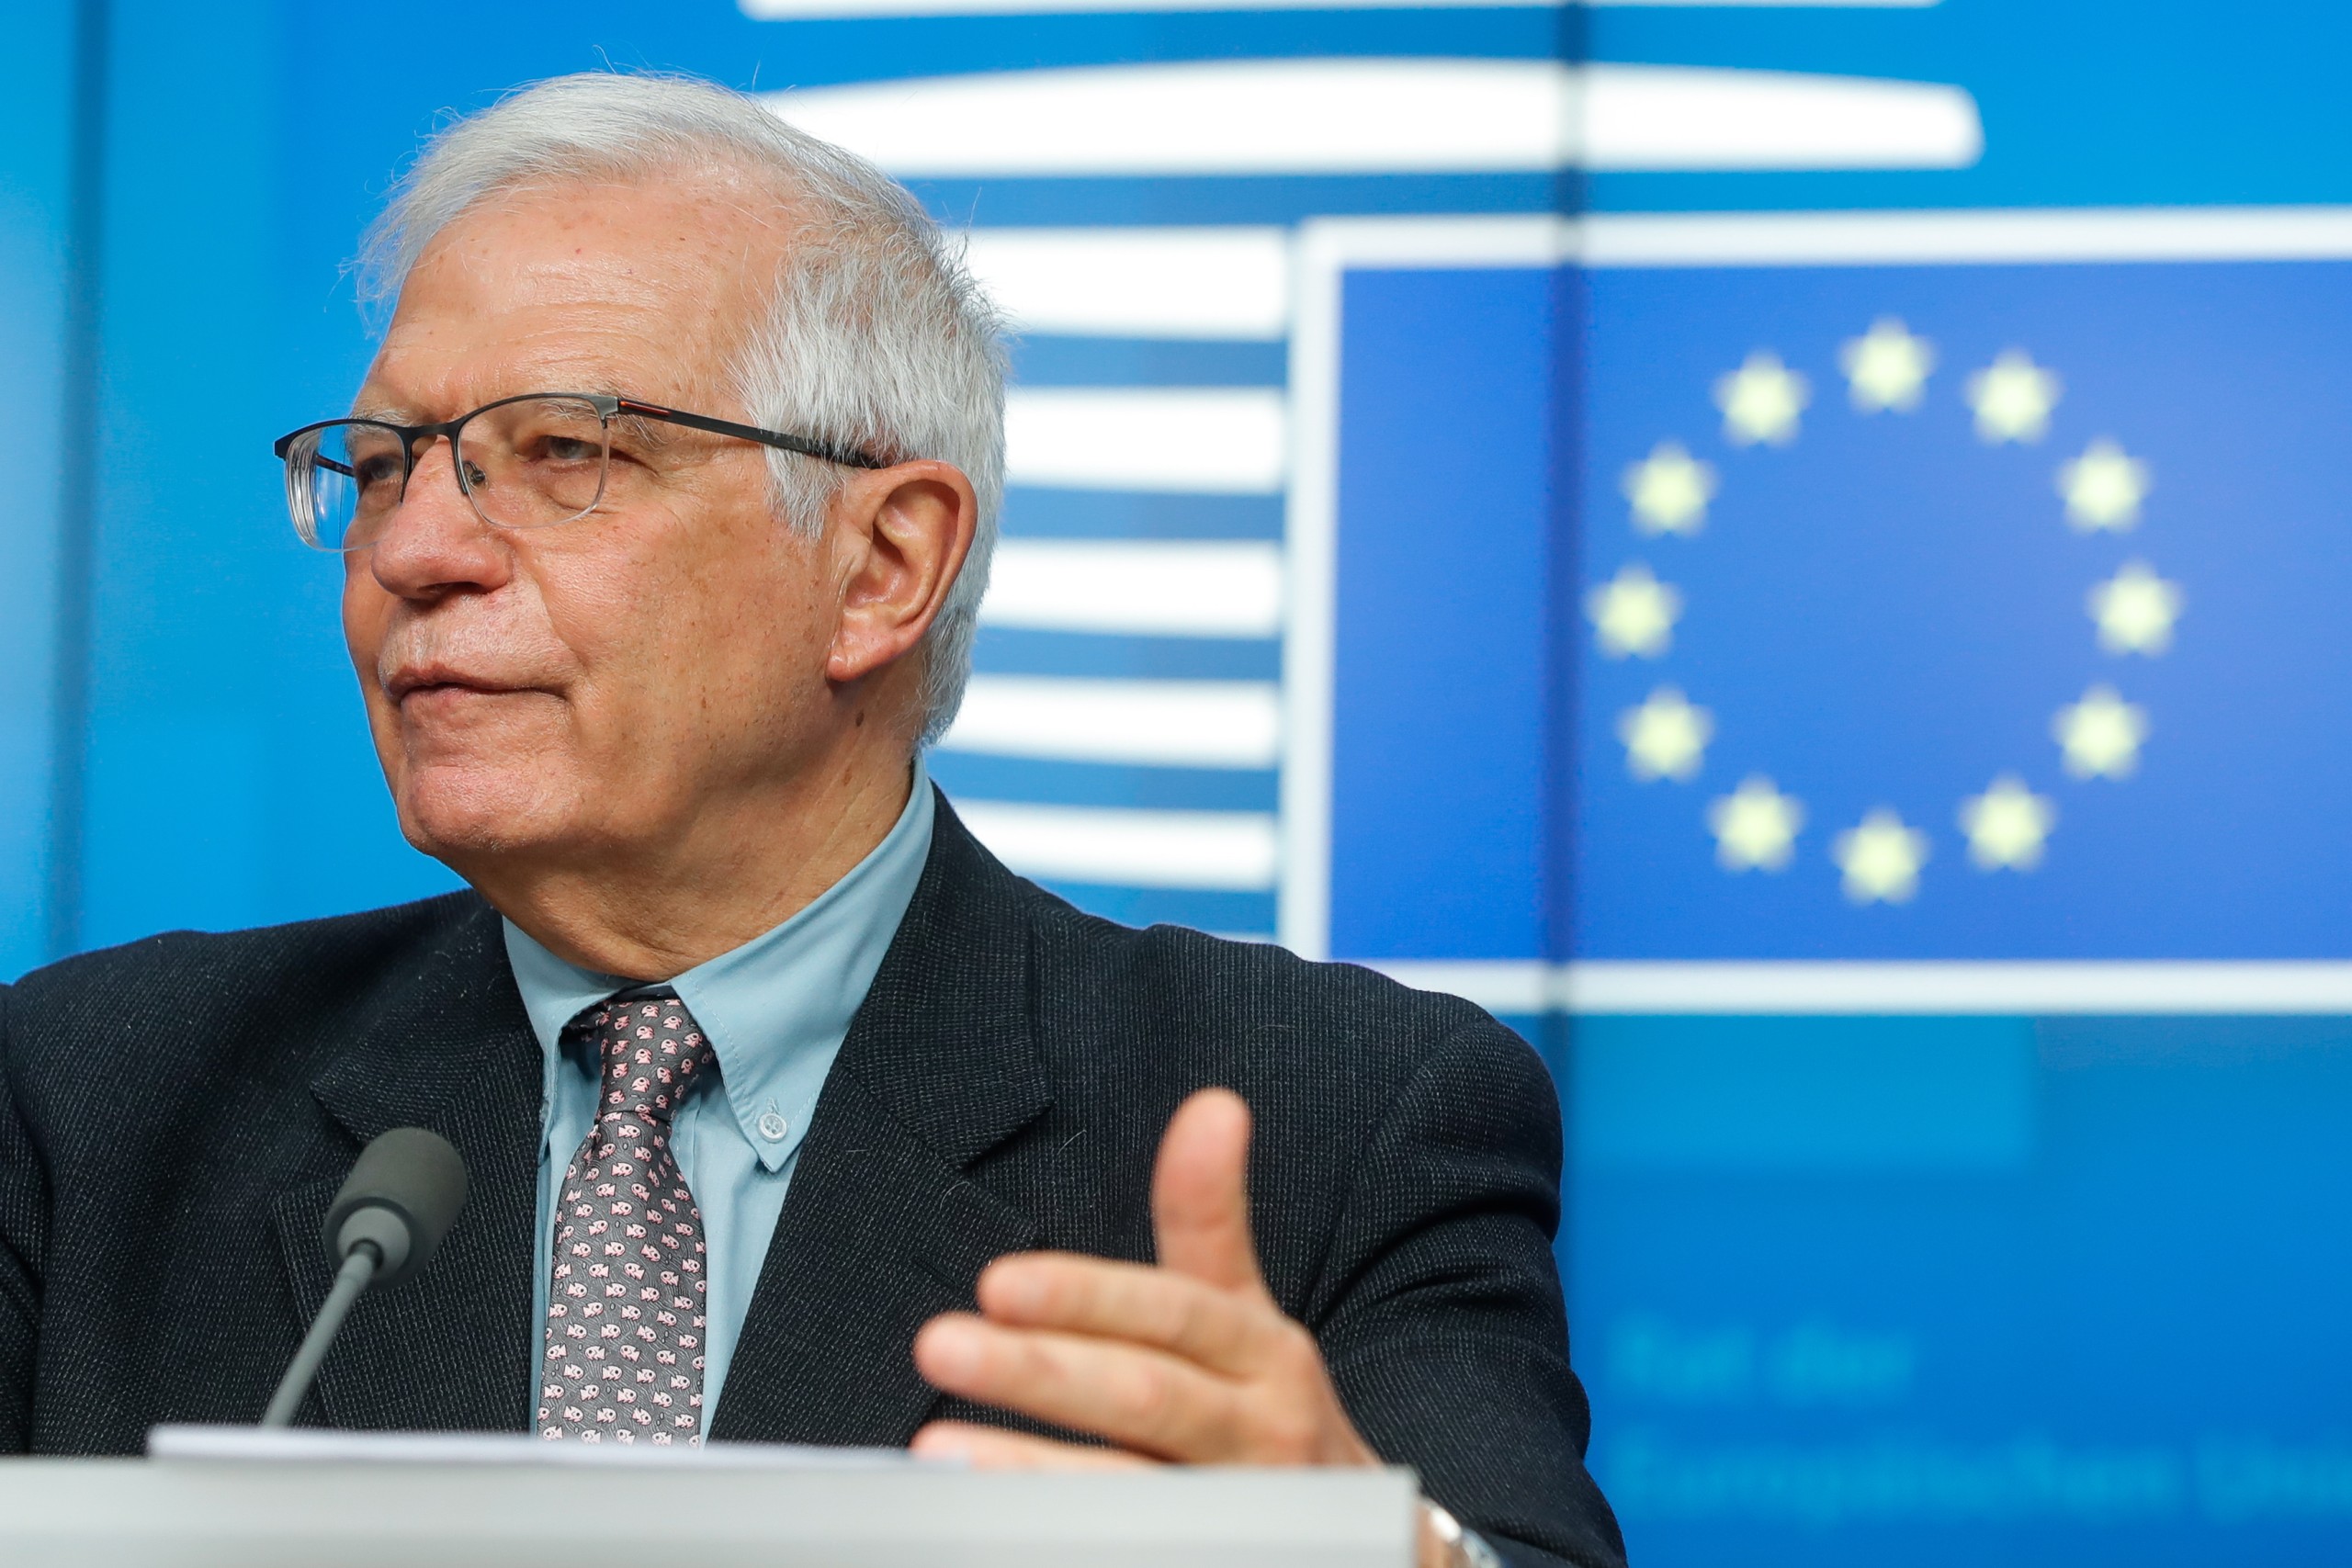 epa09791915 High Representative of the European Union for Foreign Affairs and Security Policy Josep Borrell gives a press conference at the end of an informal video conference of EU foreign affairs (defence) ministers at the European Council in Brussels, Belgium, 28 February 2022. Borrell said EU Defence Ministers discussed the situation on the ground in Ukraine following Russia's invasion, and how to further support Ukrainian armed via European Peace Facility.  EPA/STEPHANIE LECOCQ